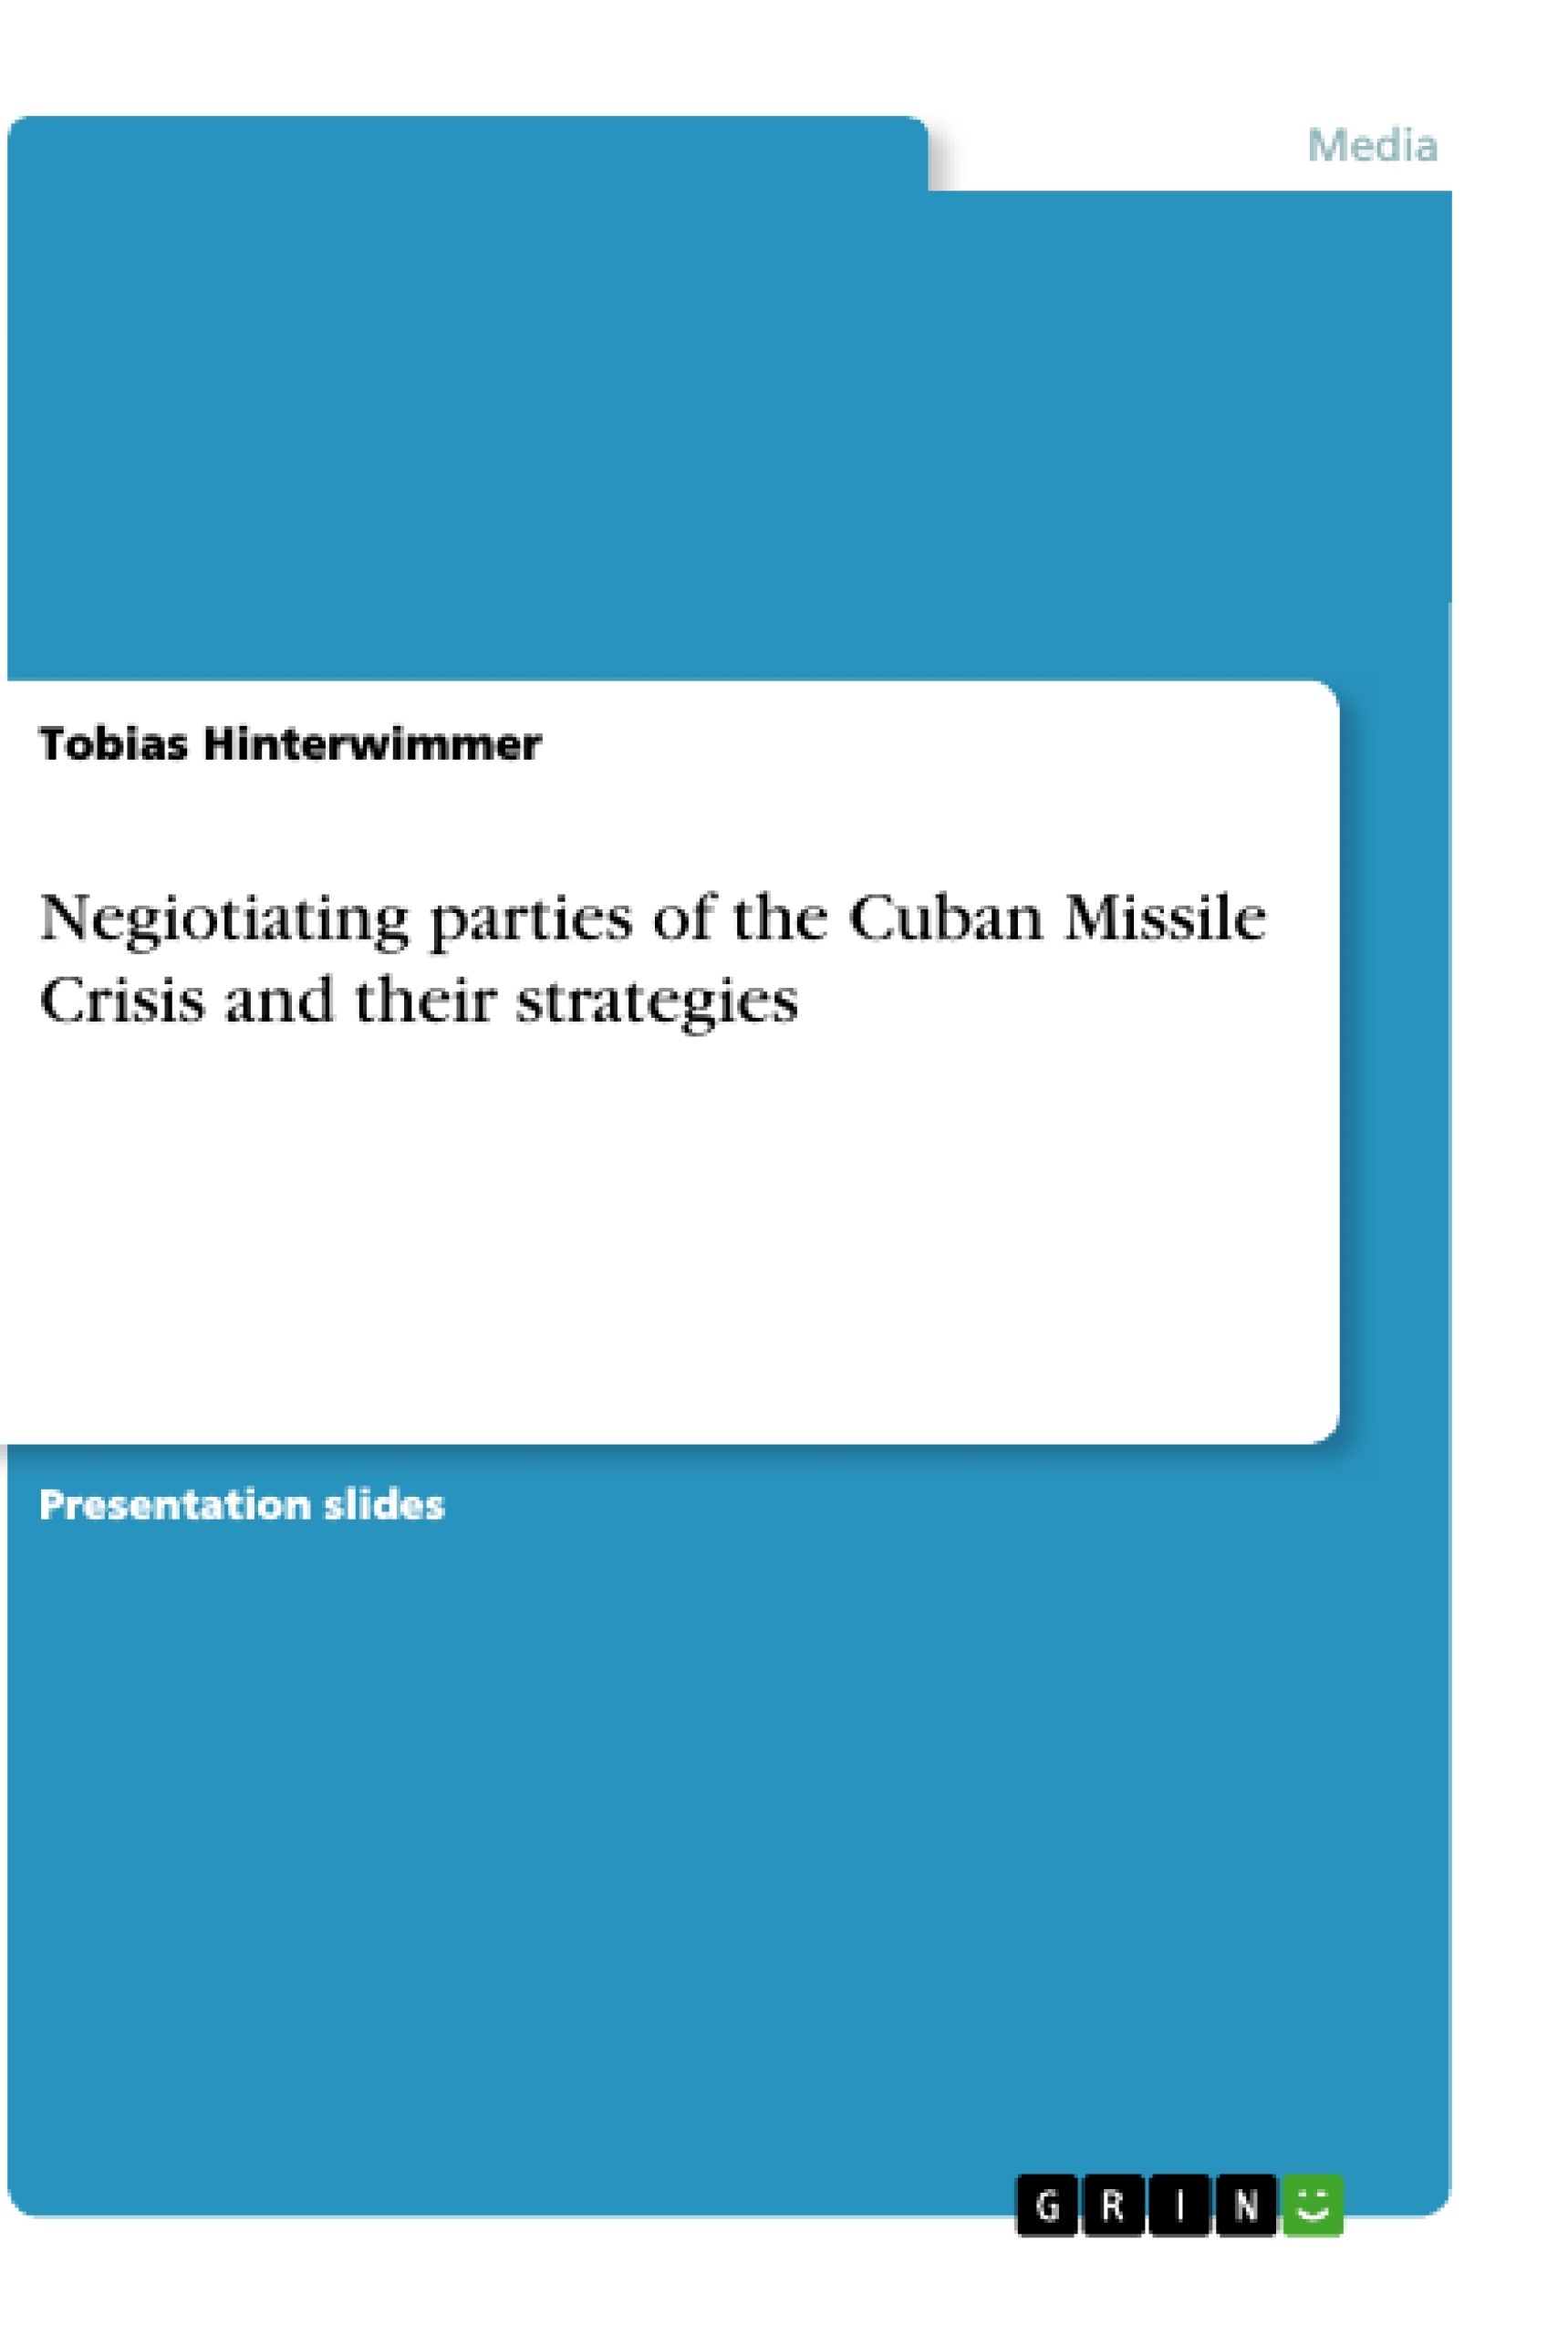 Título: Negiotiating parties of the Cuban Missile Crisis and their strategies